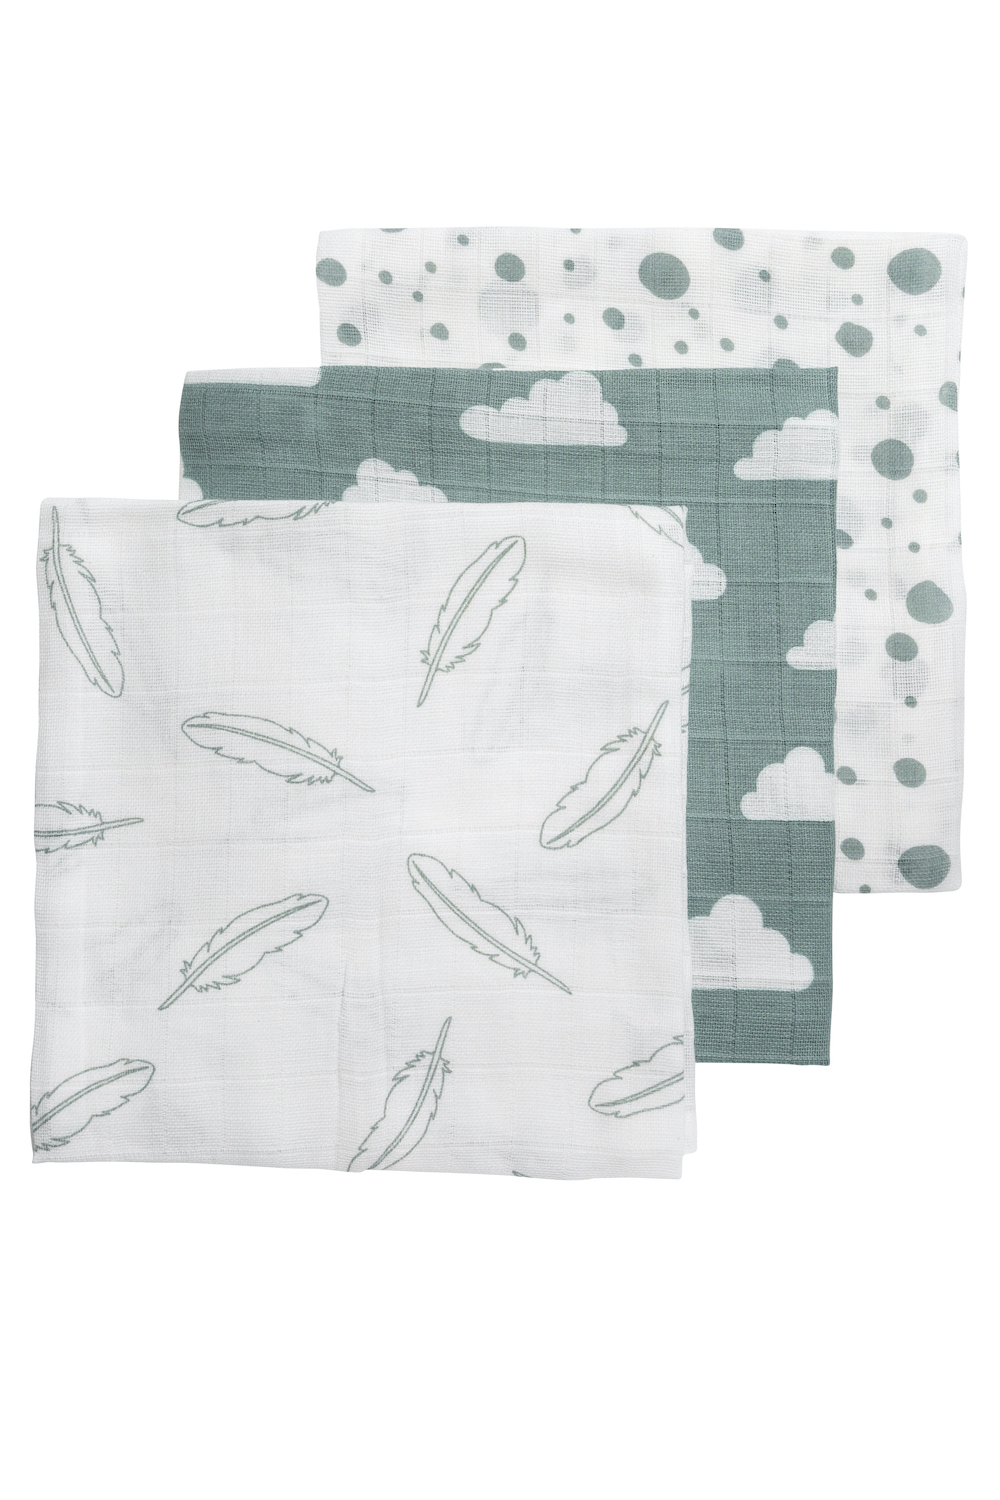 Muslin squares 3-pack Clouds/Dots/Feathers - stone green - 70x70cm